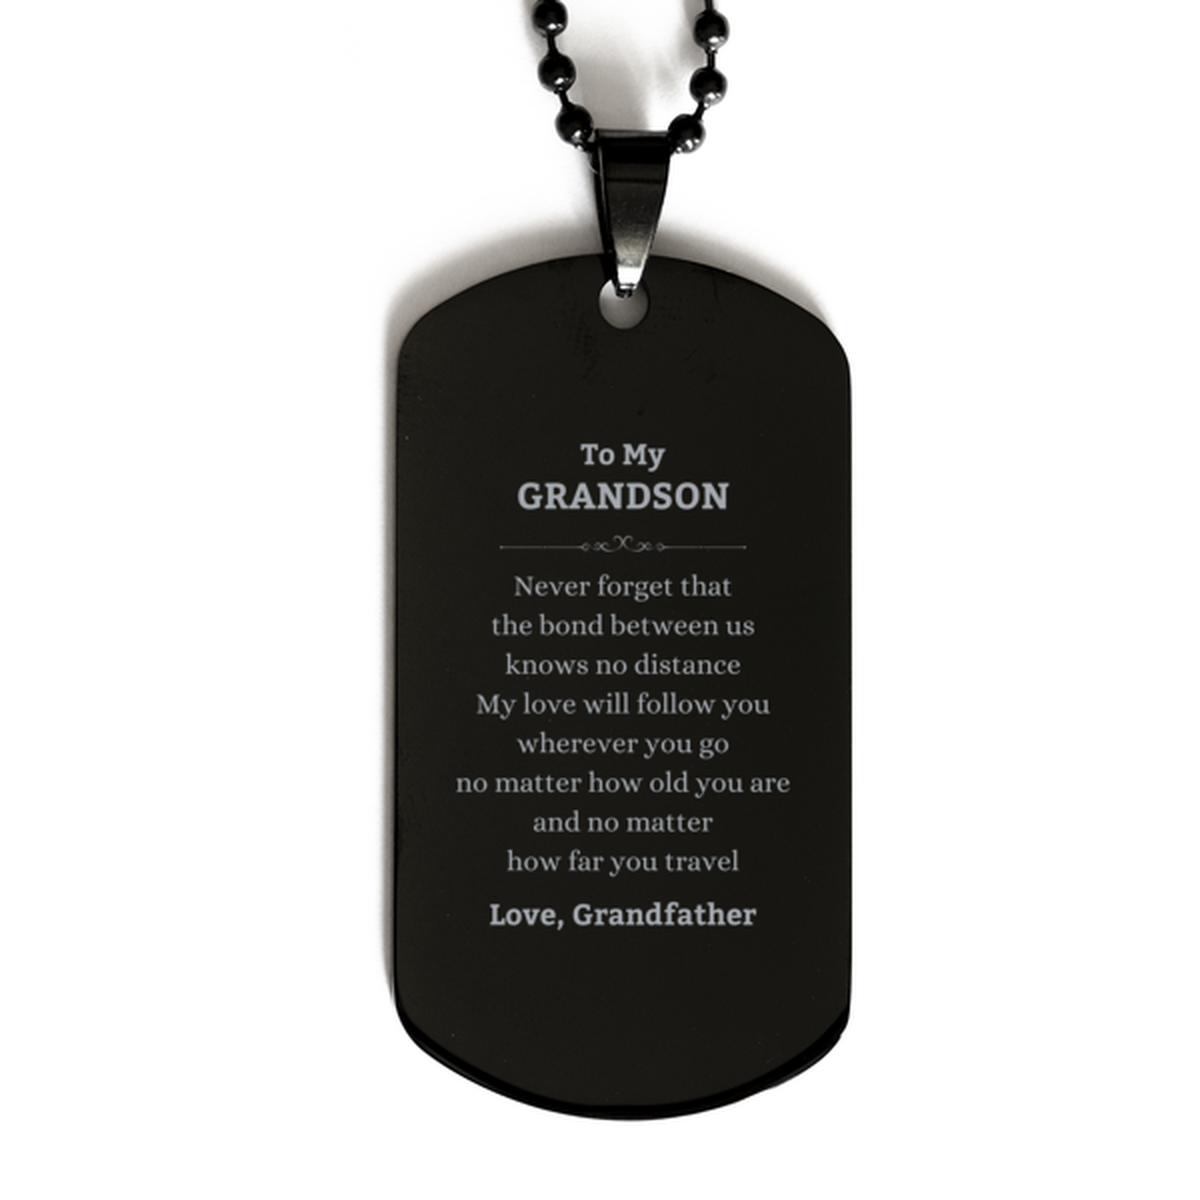 Grandson Birthday Gifts from Grandfather, Adjustable Black Dog Tag for Grandson Christmas Graduation Unique Gifts Grandson Never forget that the bond between us knows no distance. Love, Grandfather